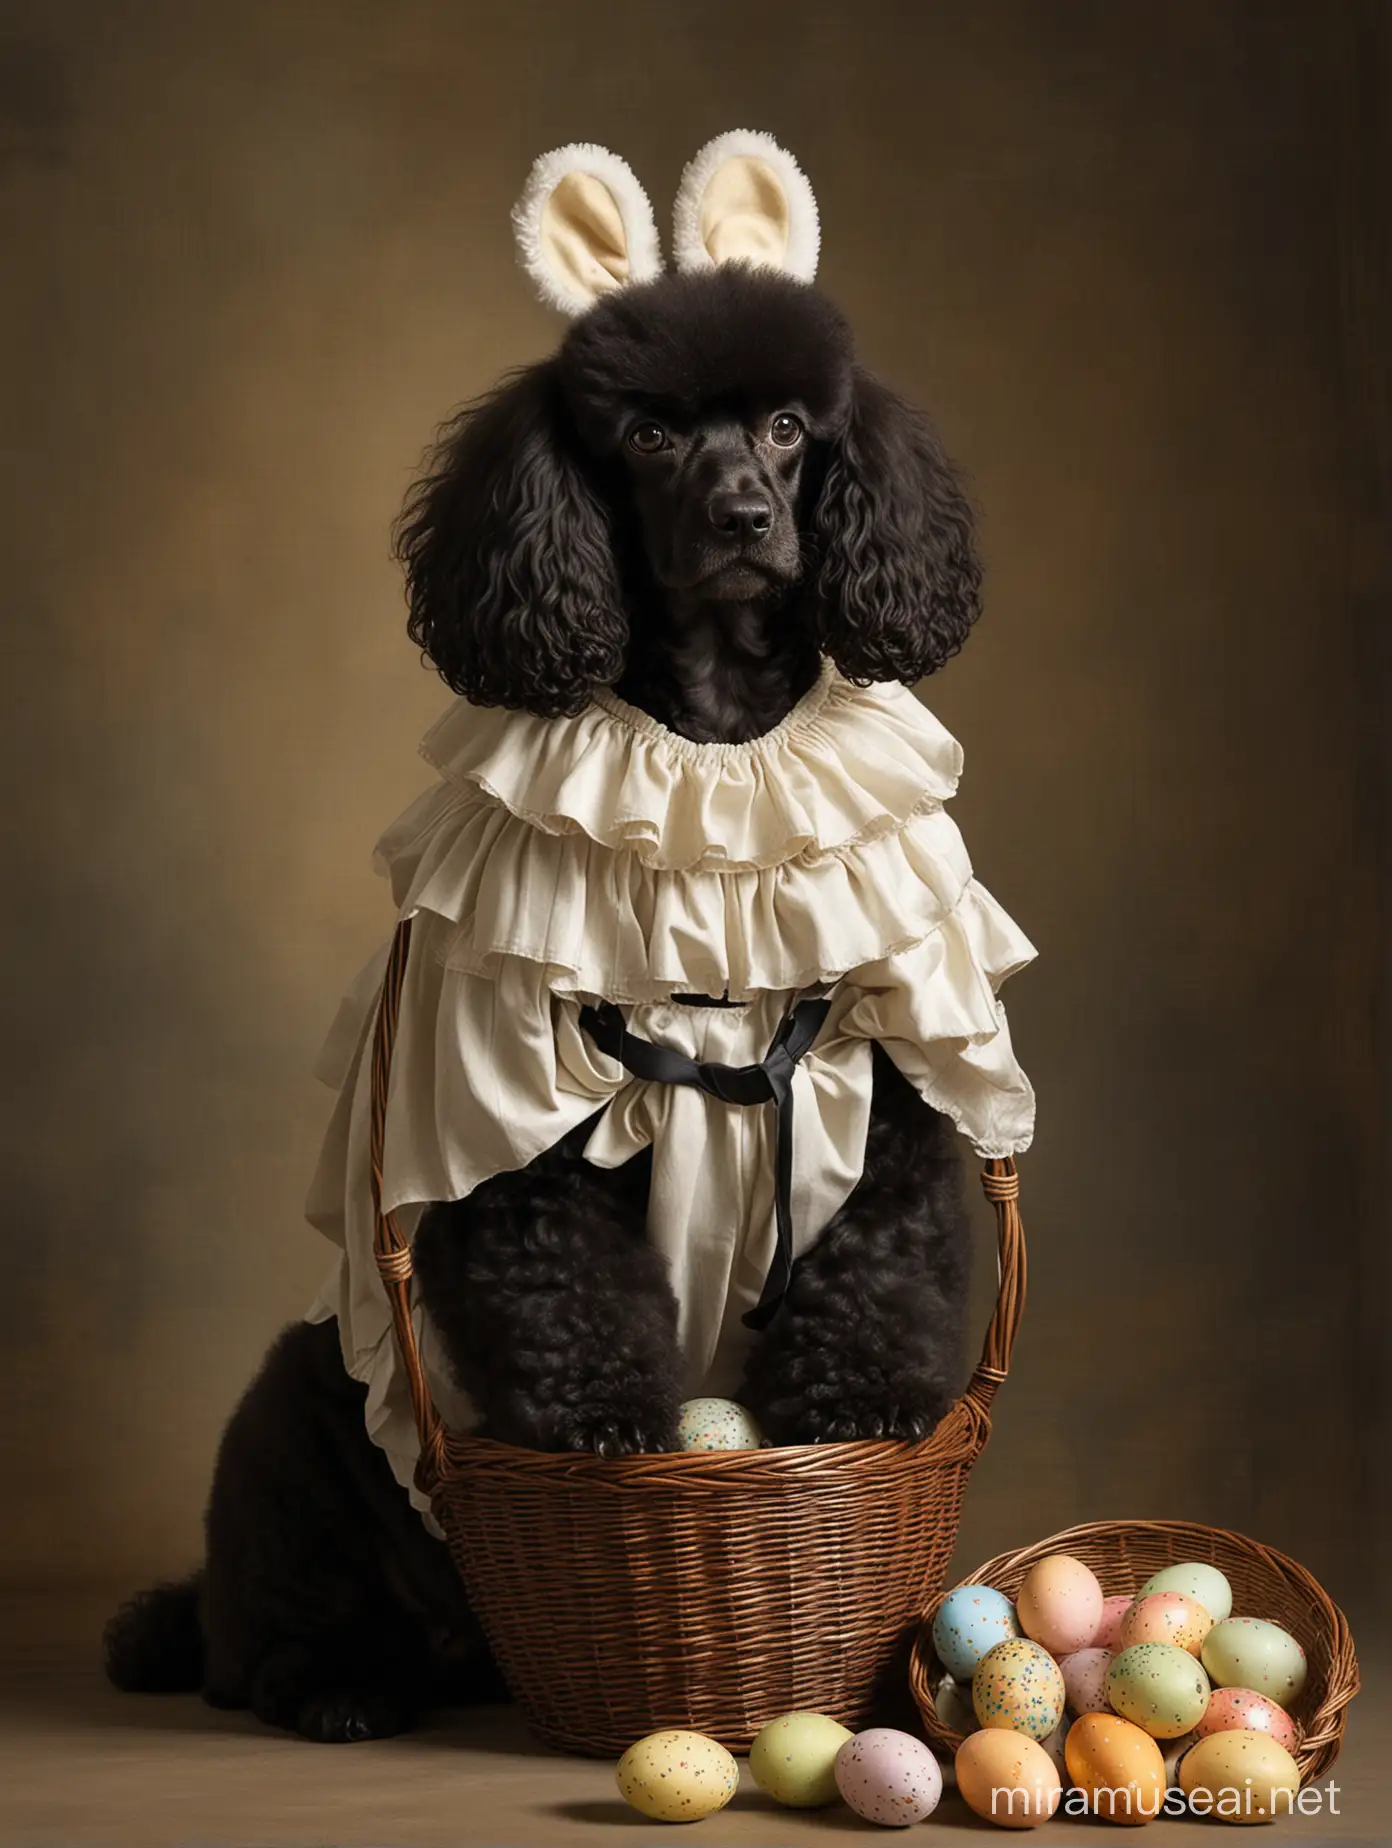 A black medium-sized French Poodle, dressed as an Easter Bunny, in the style of 1600 century painter Caravaggio. The surroundings are typical 1600s Italy, and the dog is carrying in its mout a small wicker basket with Easter eggs, all in the style of Caravaggio. 